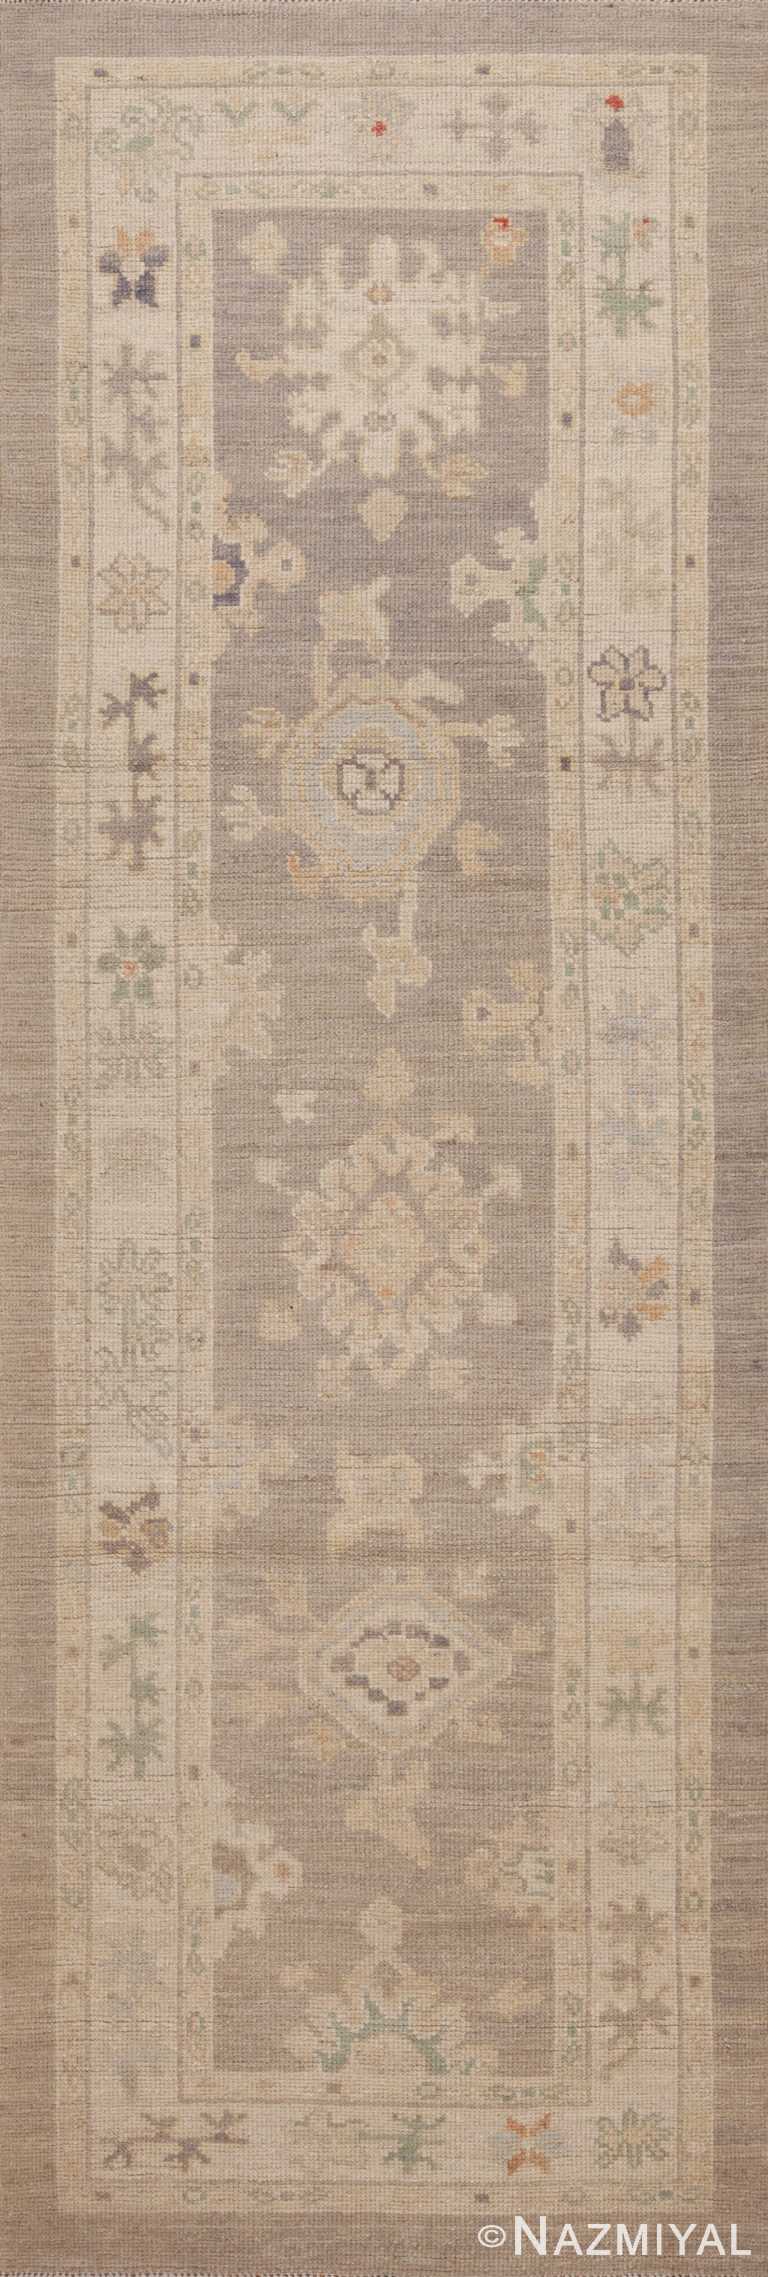 A Warm and Cozy Soft Neutral Grey Pastel Color Tribal Geometric Modern Turkish Oushak Design Hallway Runner Rug 11195 by Nazmiyal Antique Rugs